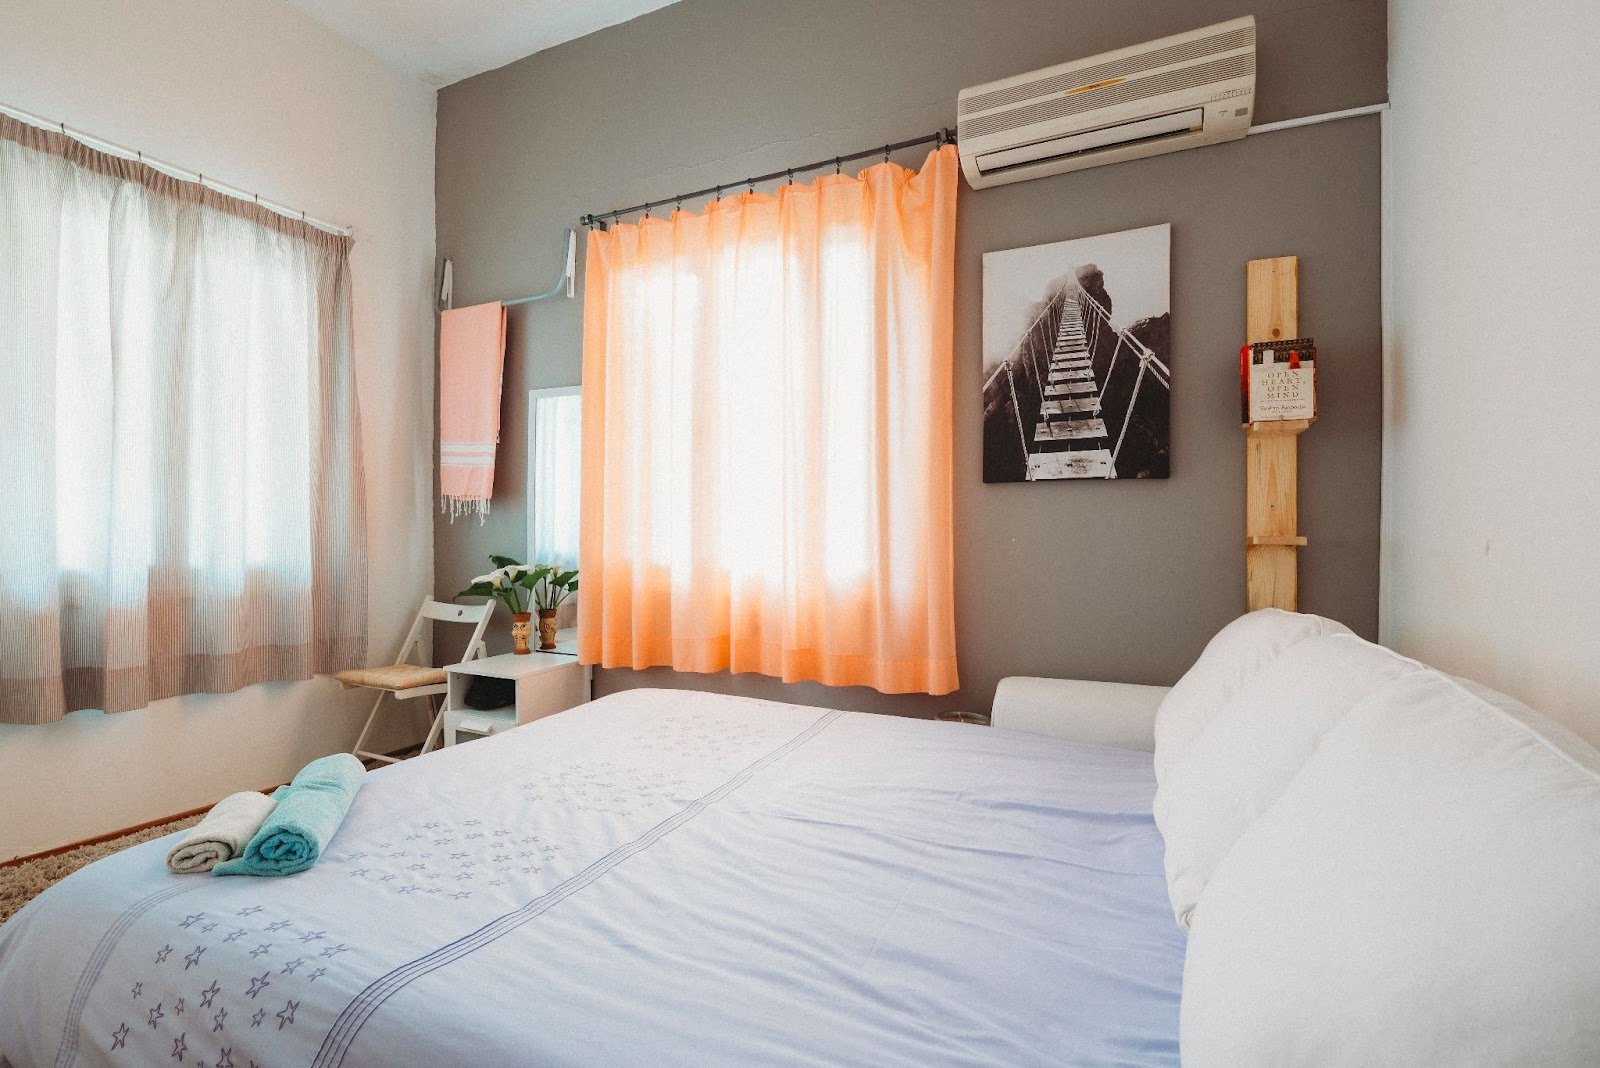 Starting an Airbnb: 5 Essential Steps